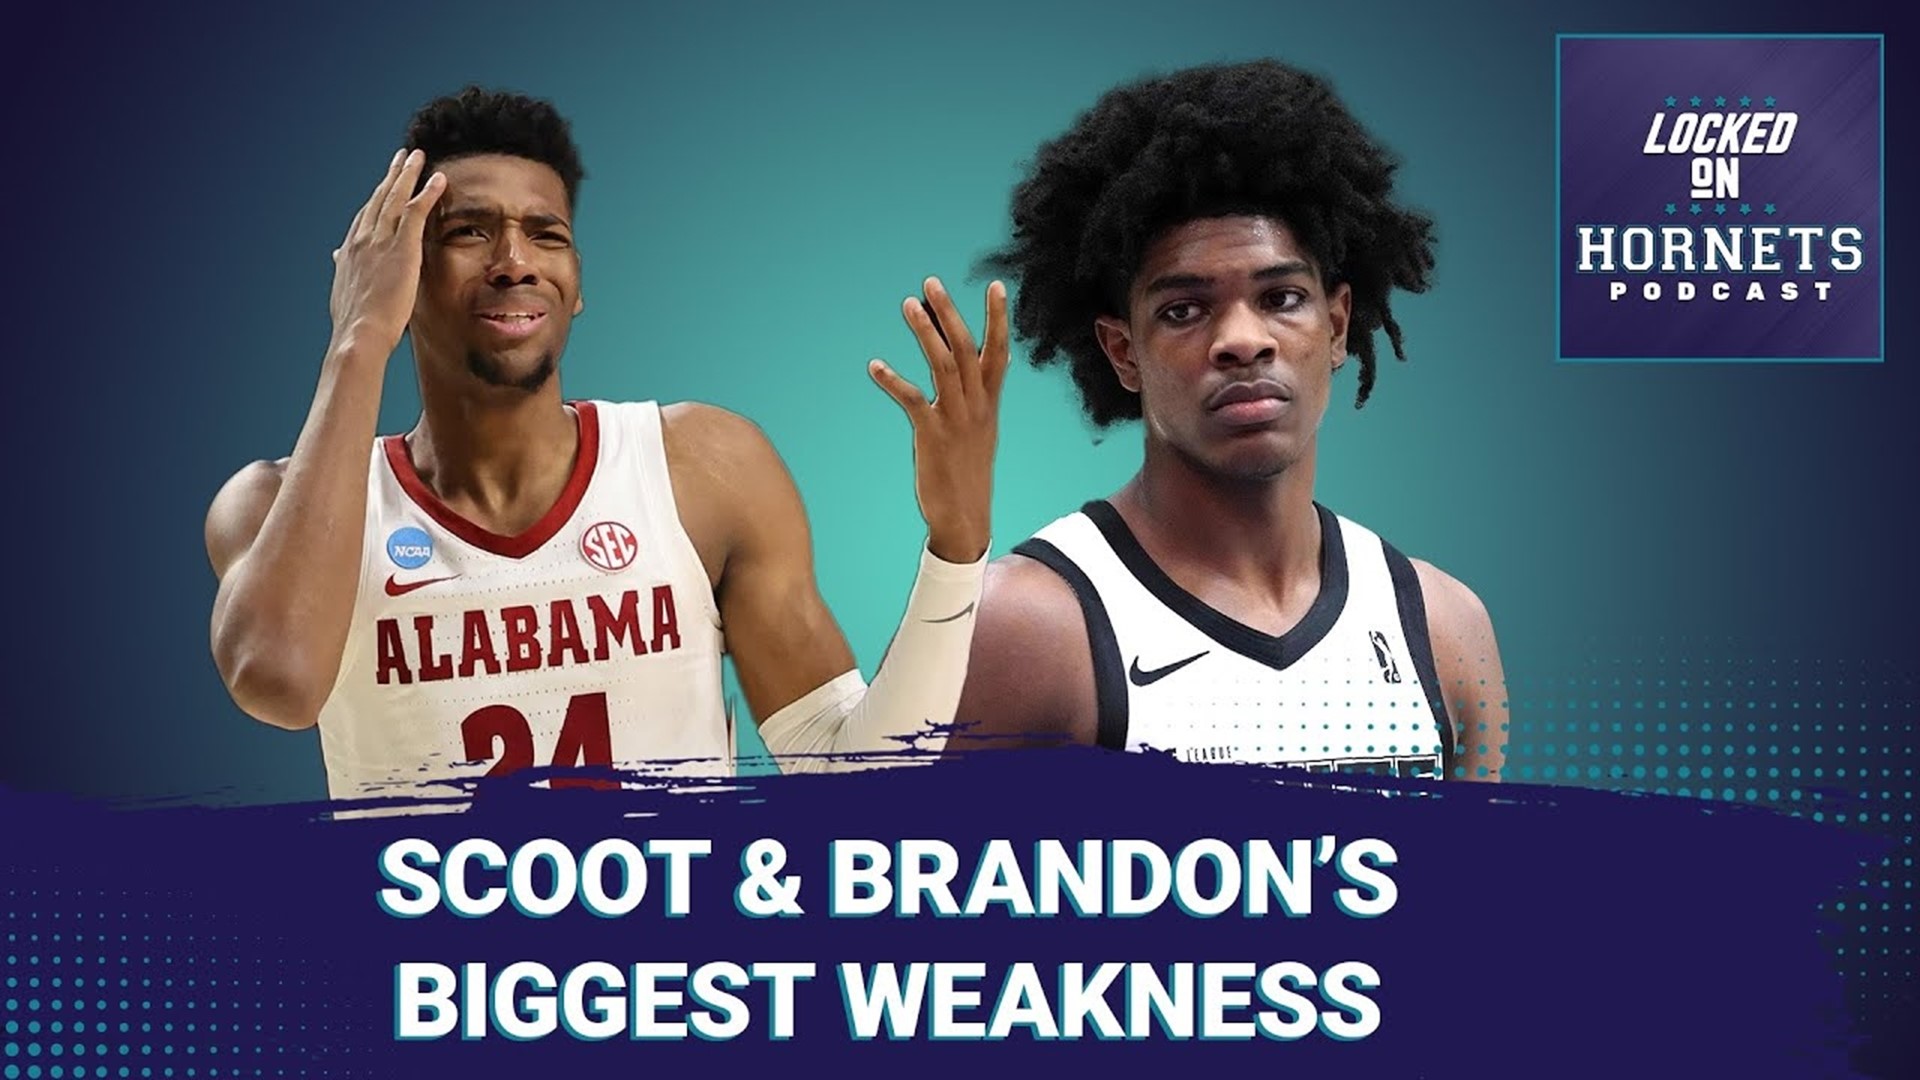 What are your biggest concerns regarding Scoot Henderson and Brandon Miller as they transition to the next level?